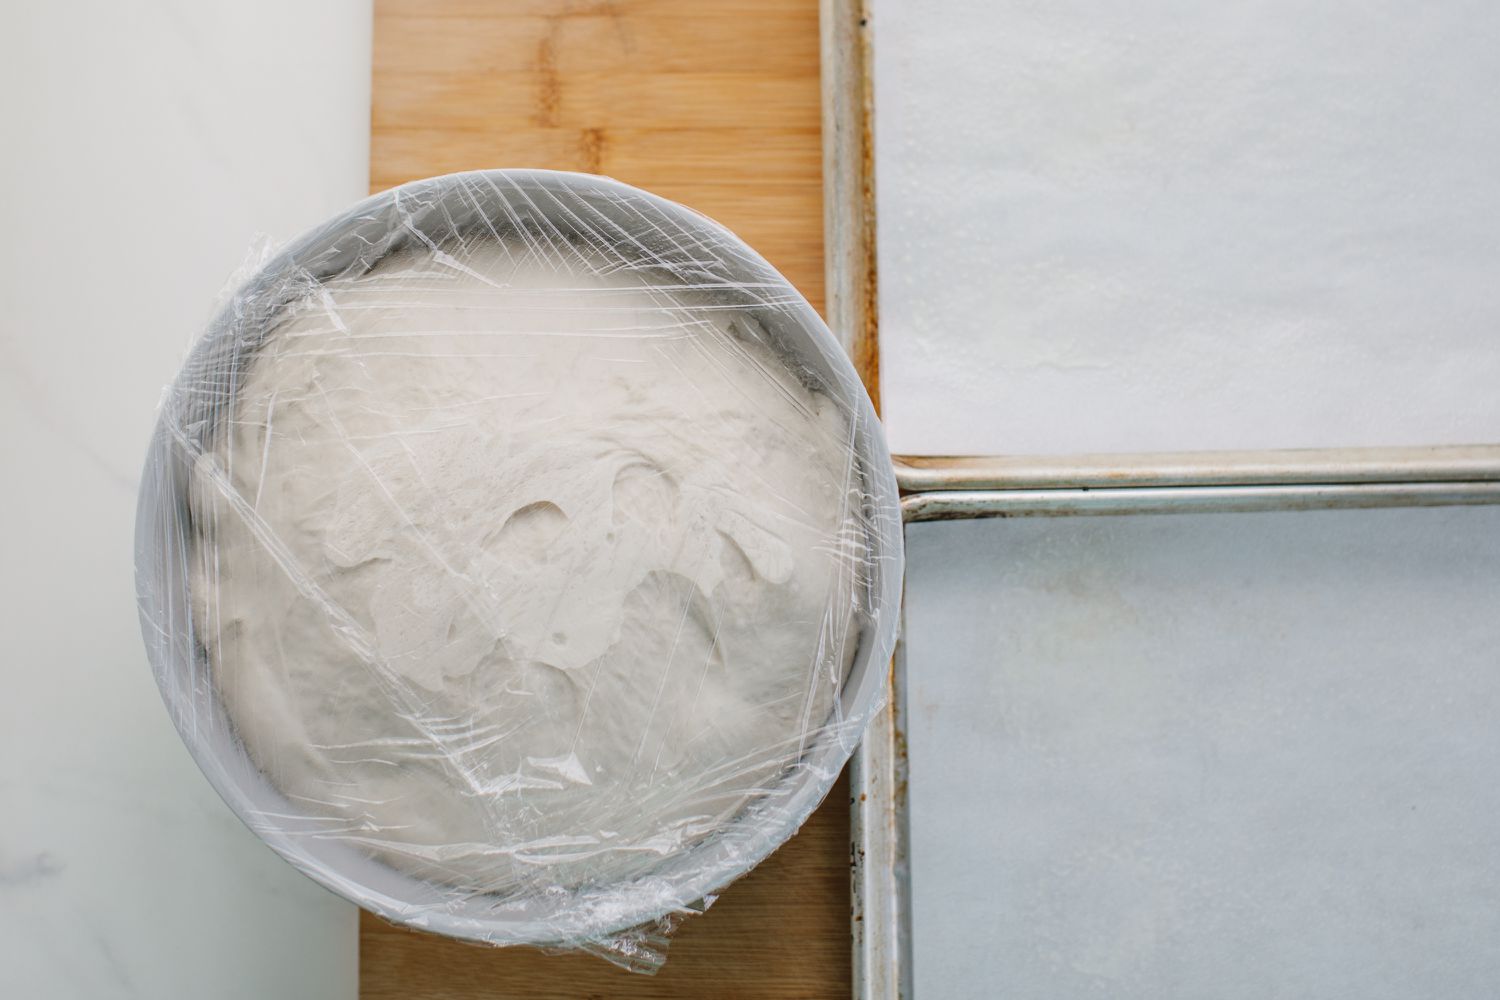 Dough covered in plastic wrap next to baking sheets